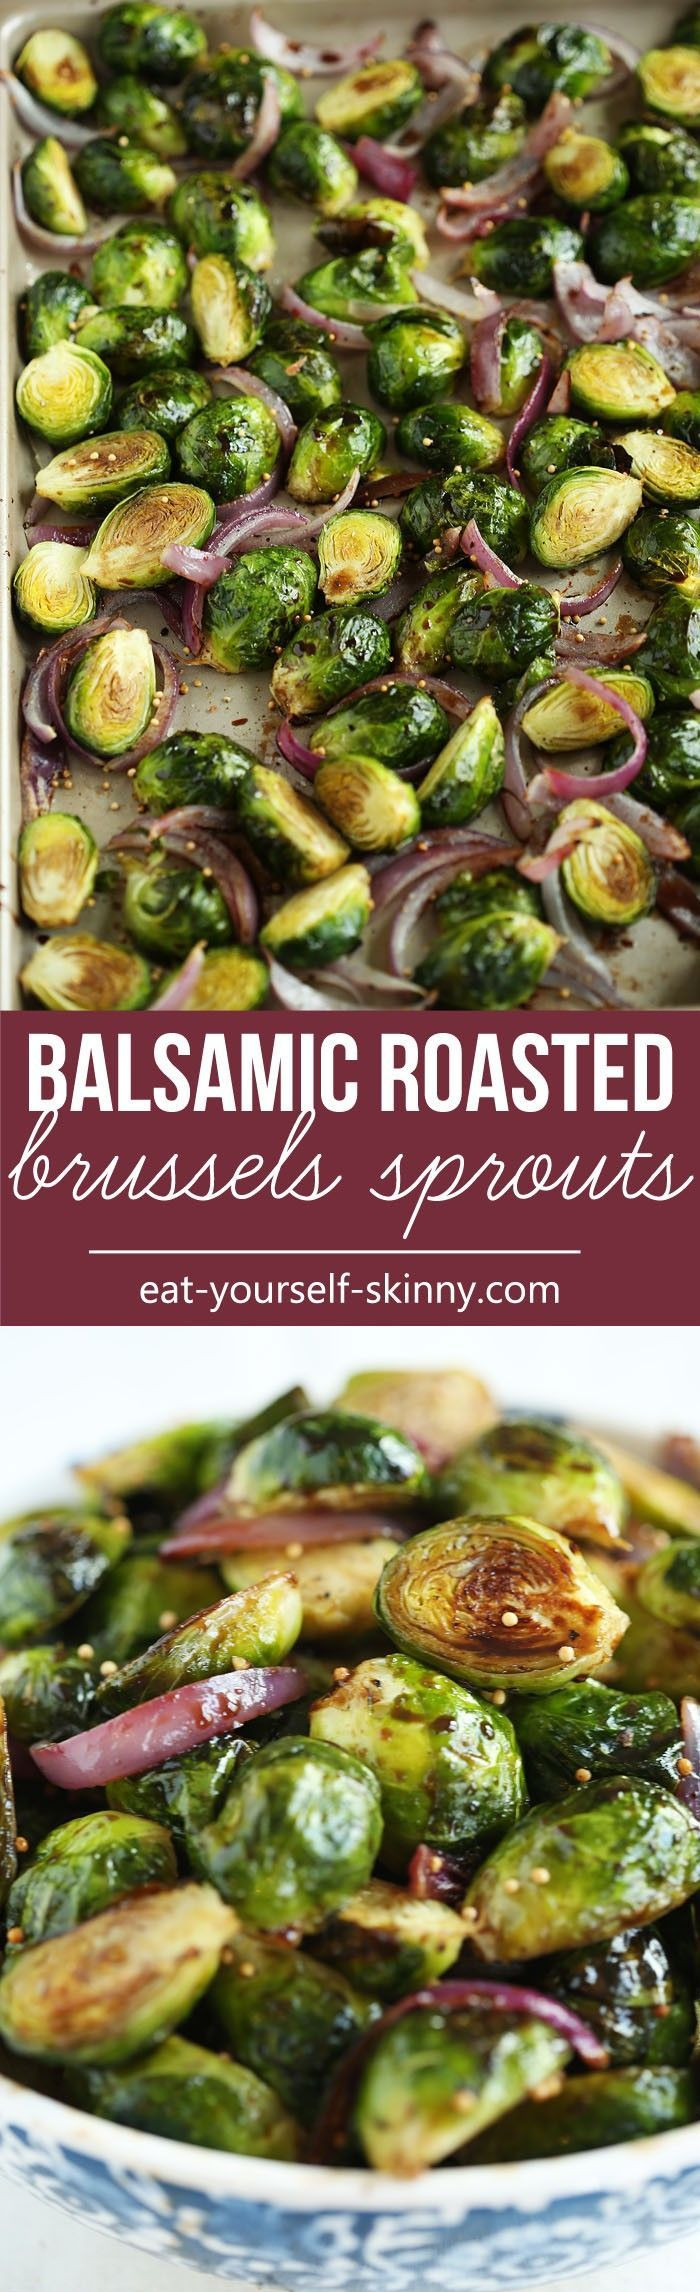 Baby Brussel Sprouts Recipes
 Balsamic Roasted Brussels Sprouts